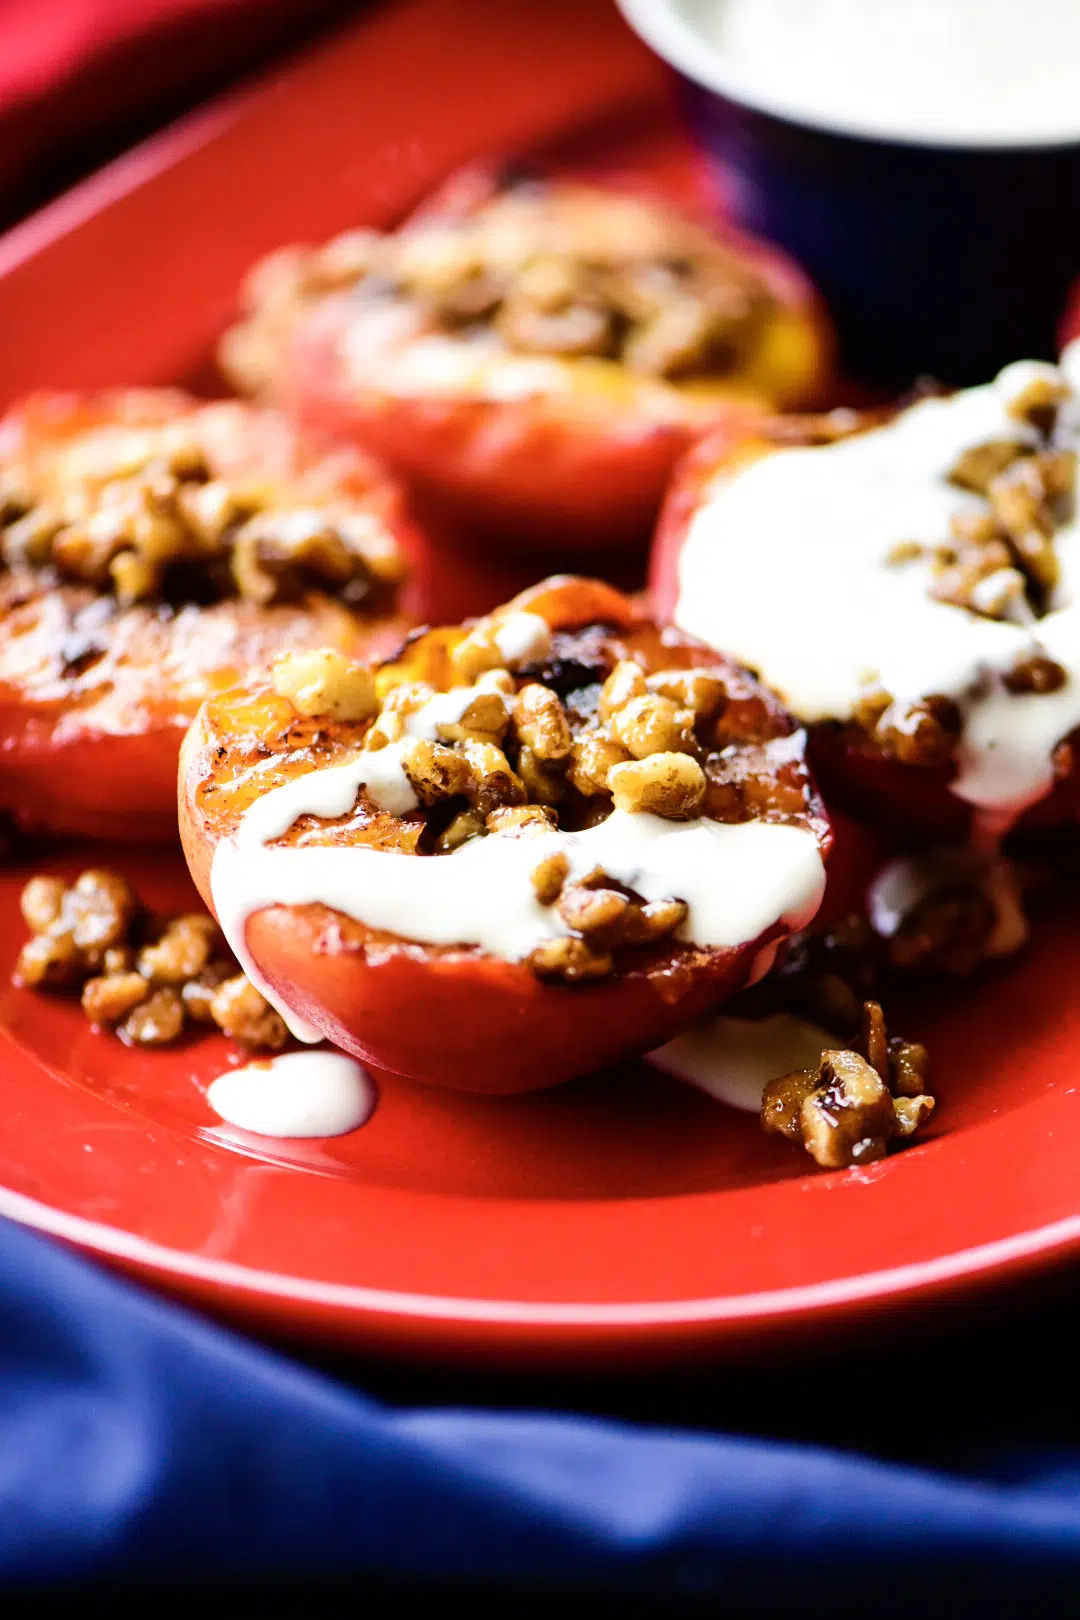 grilled peaches with candies walnuts and cream